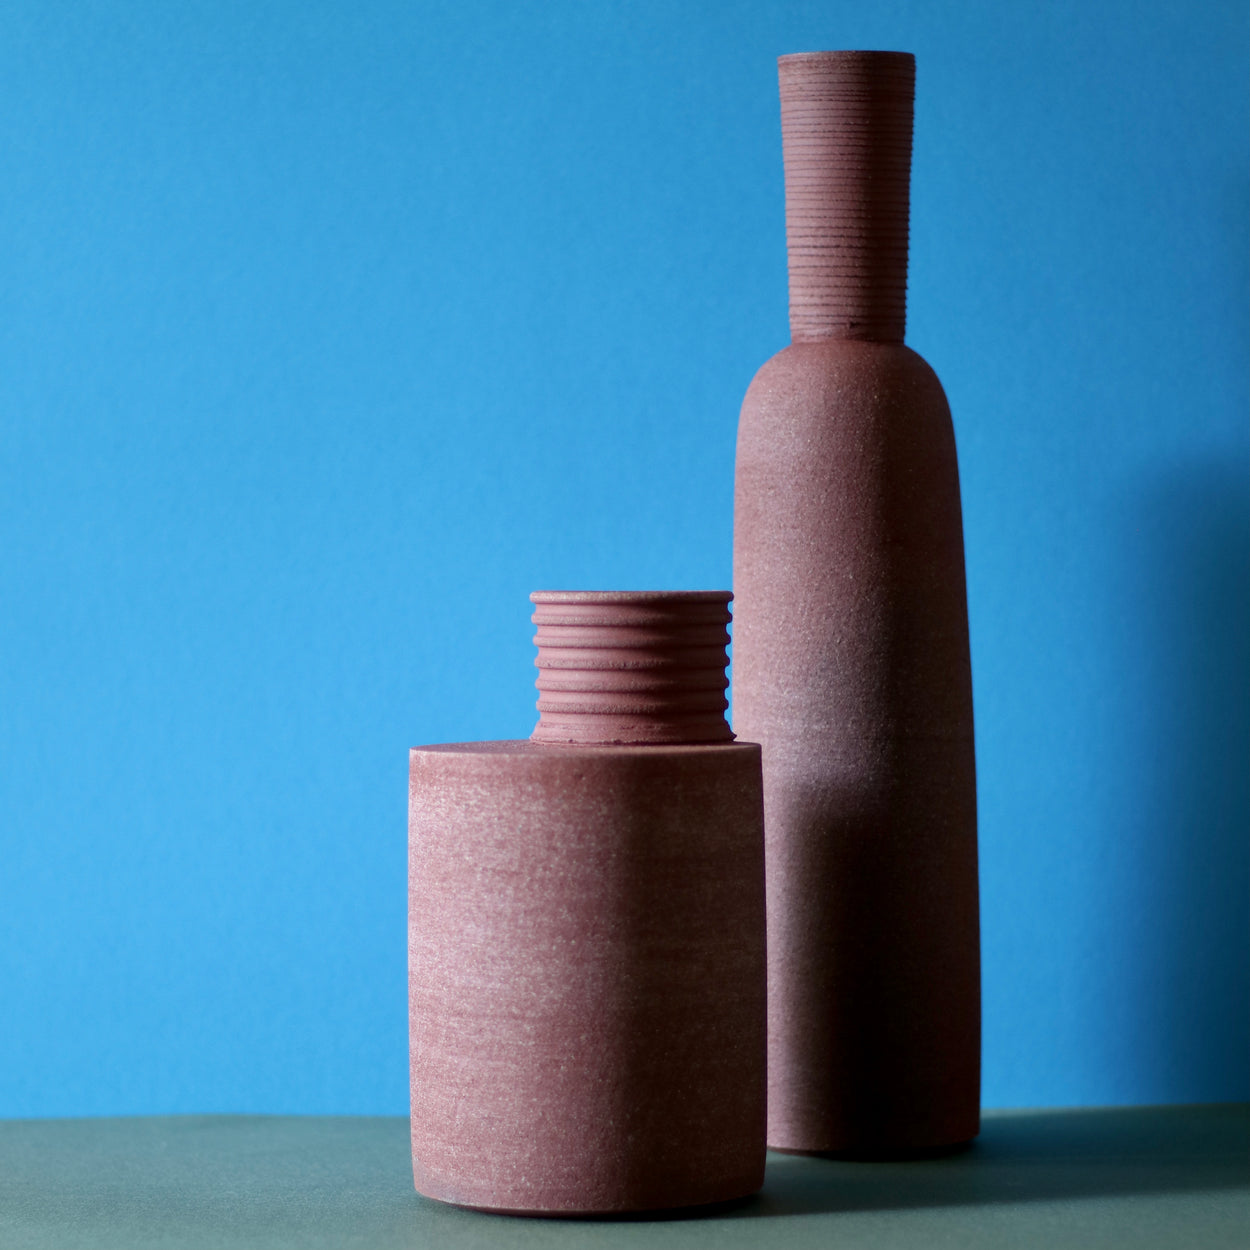 Group view of Handmade Ceramic Vases by Amanda-Sue Rope against a blue and green background.